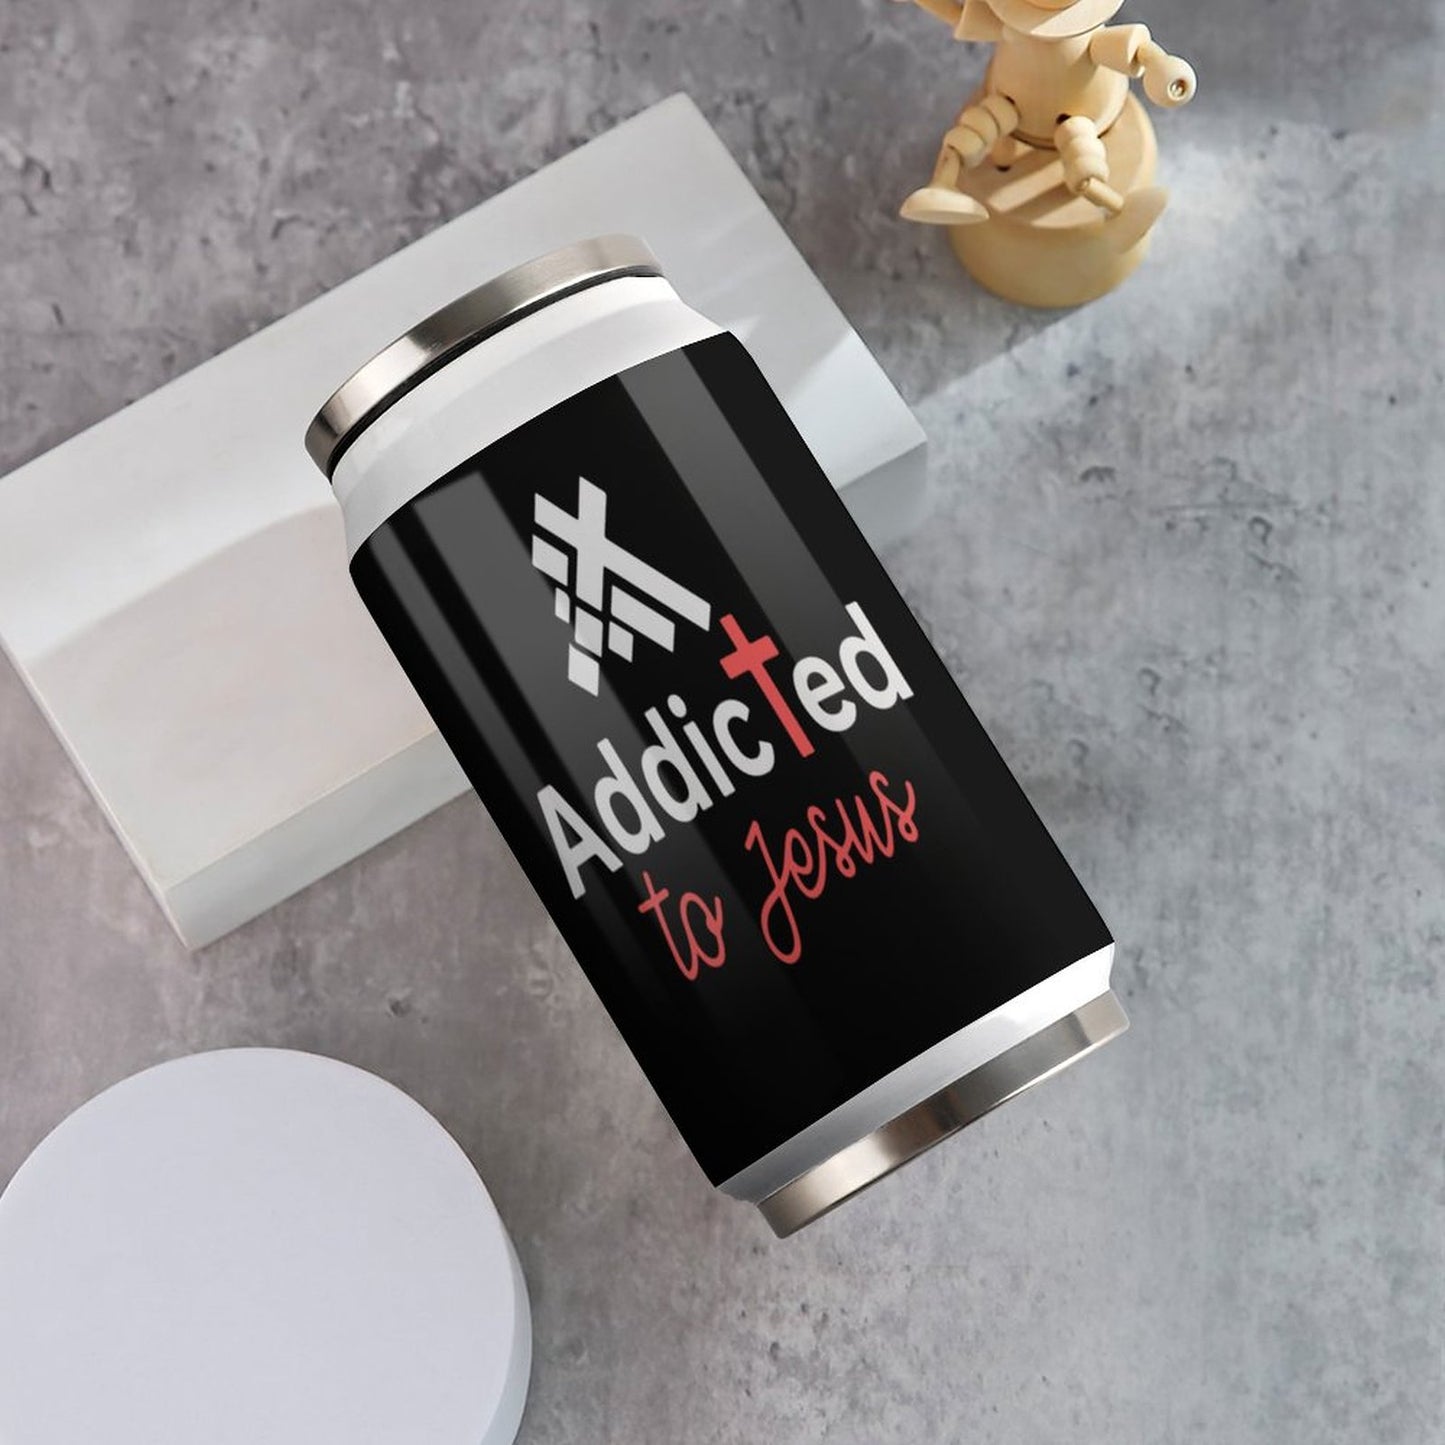 Addicted To Jesus Unique Christian Stainless Steel Tumbler with Straw SALE-Personal Design